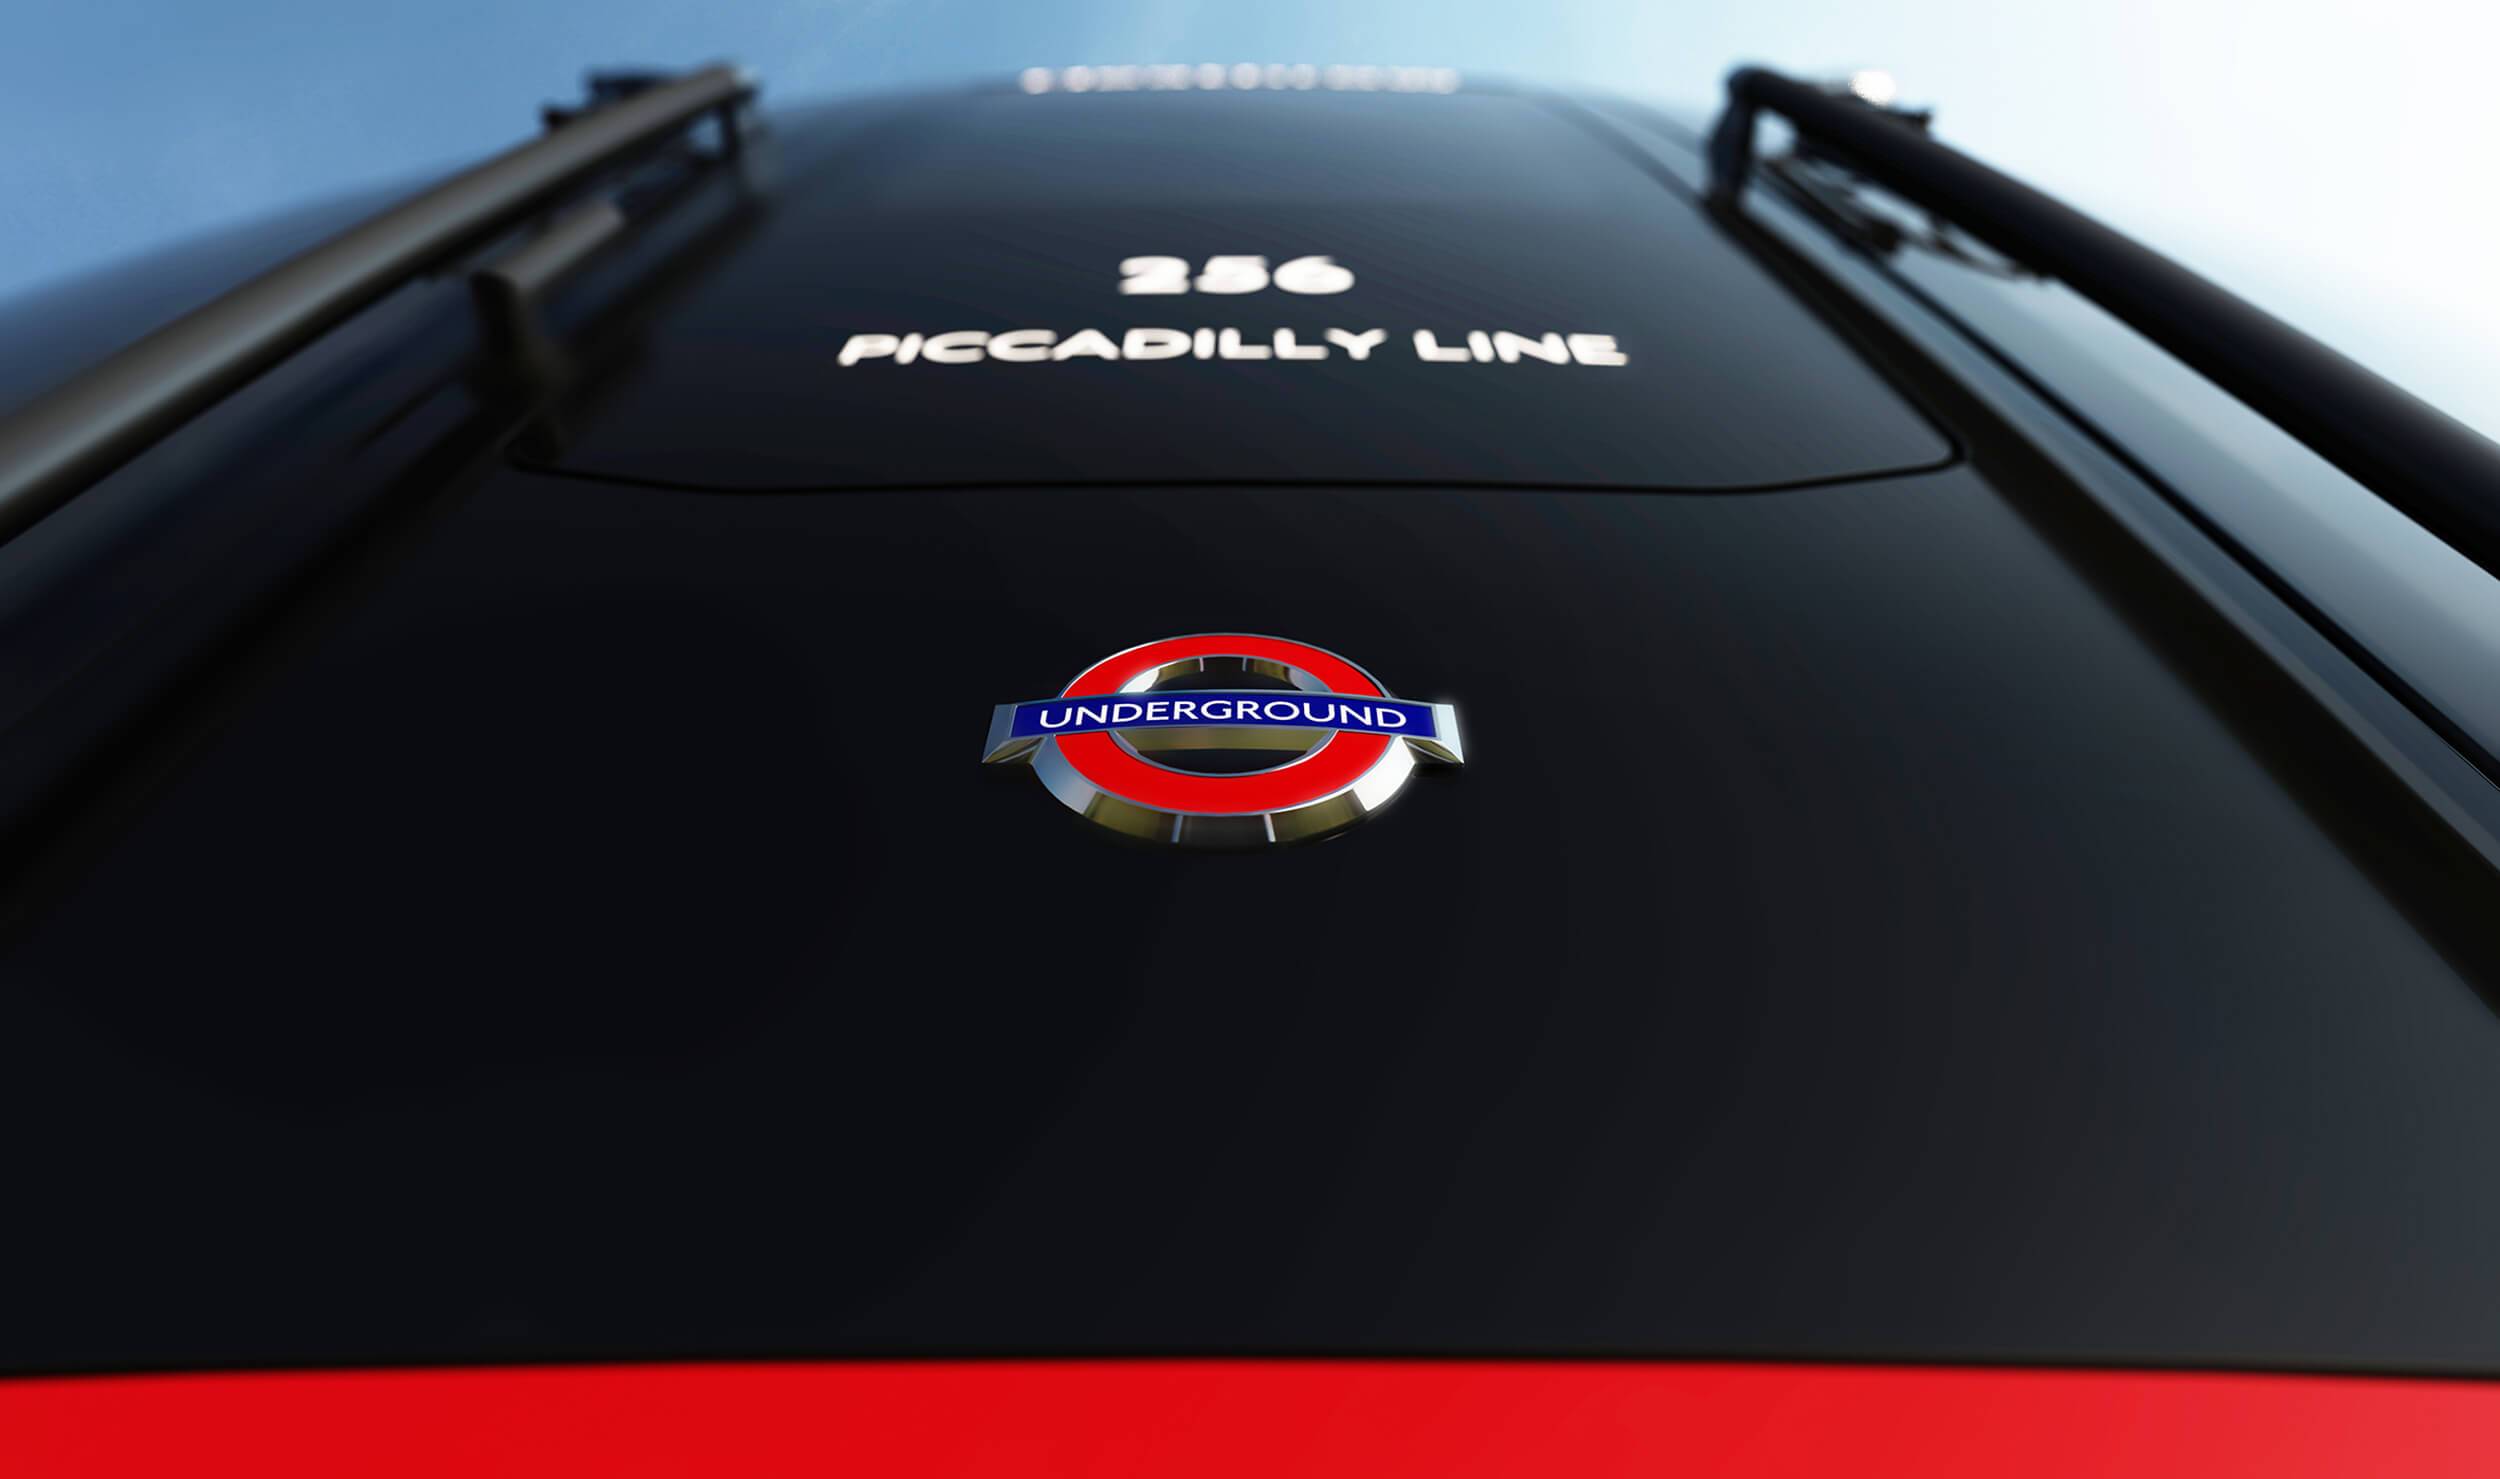 Close up of the front of a Piccadilly Line London Underground train carriage